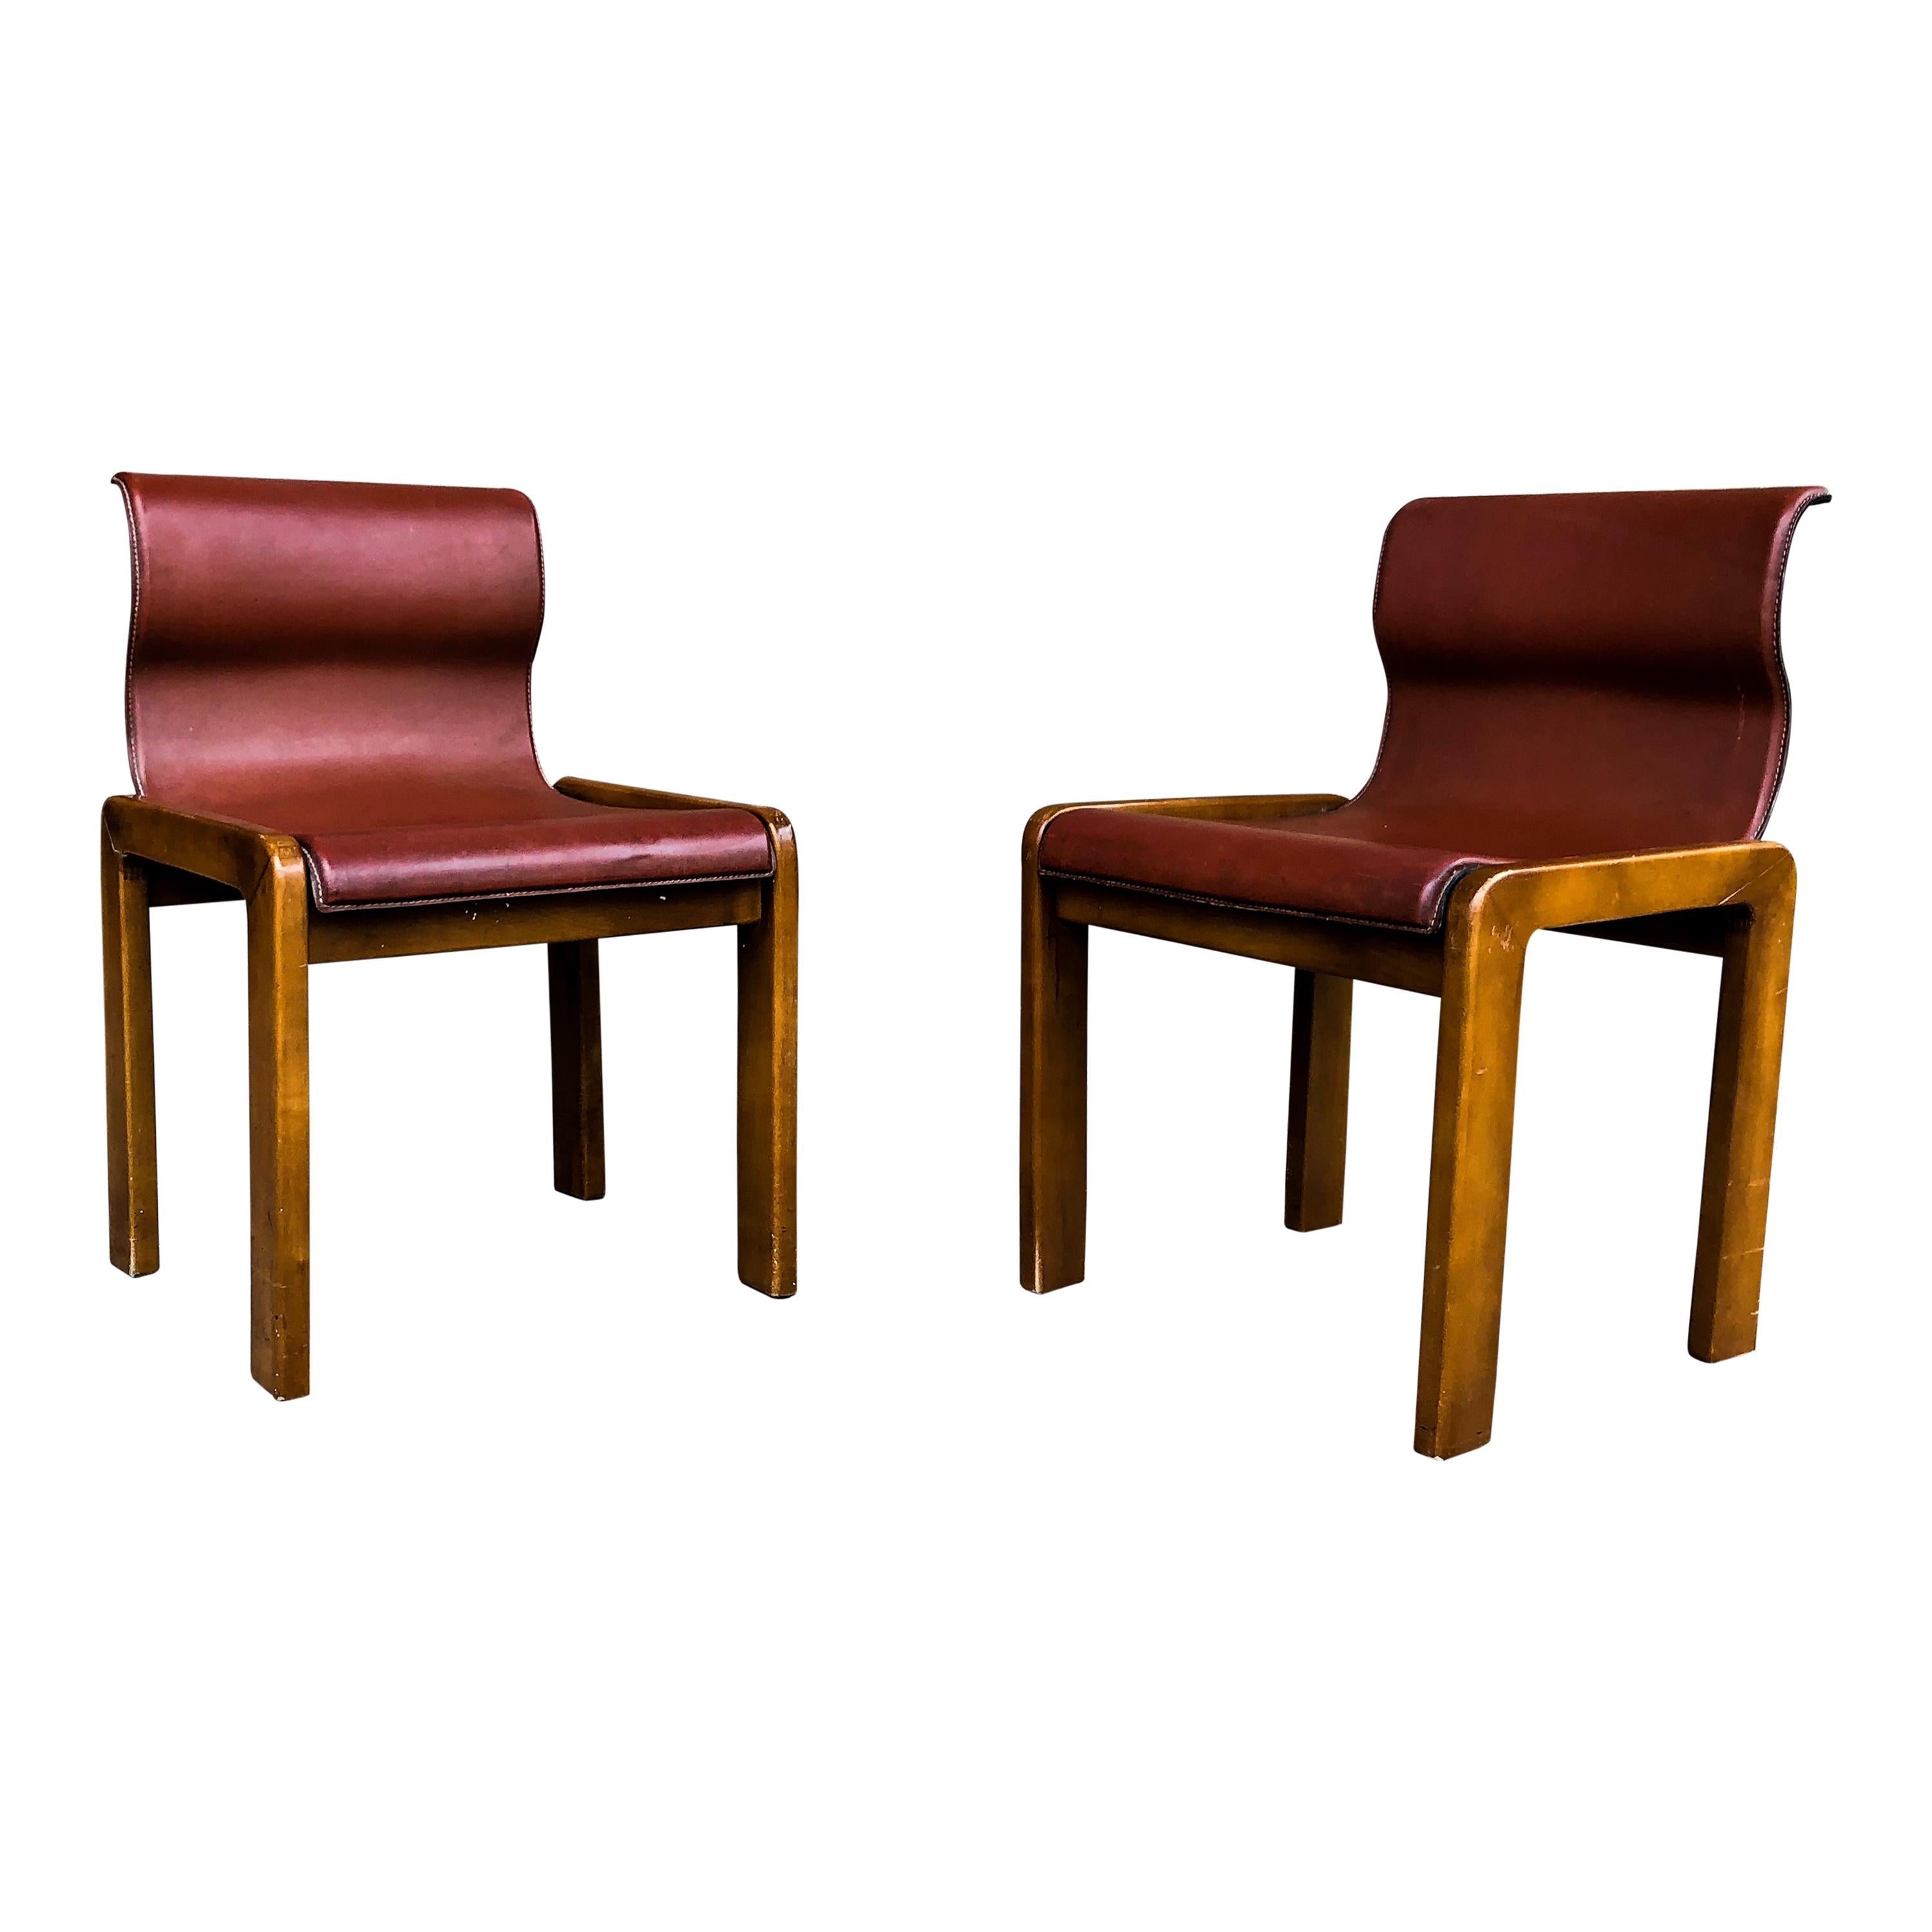 Afra & Tobia Scarpa Midcentury Leather and Plywood Dining Chair, 1966, Set of 4 For Sale 4